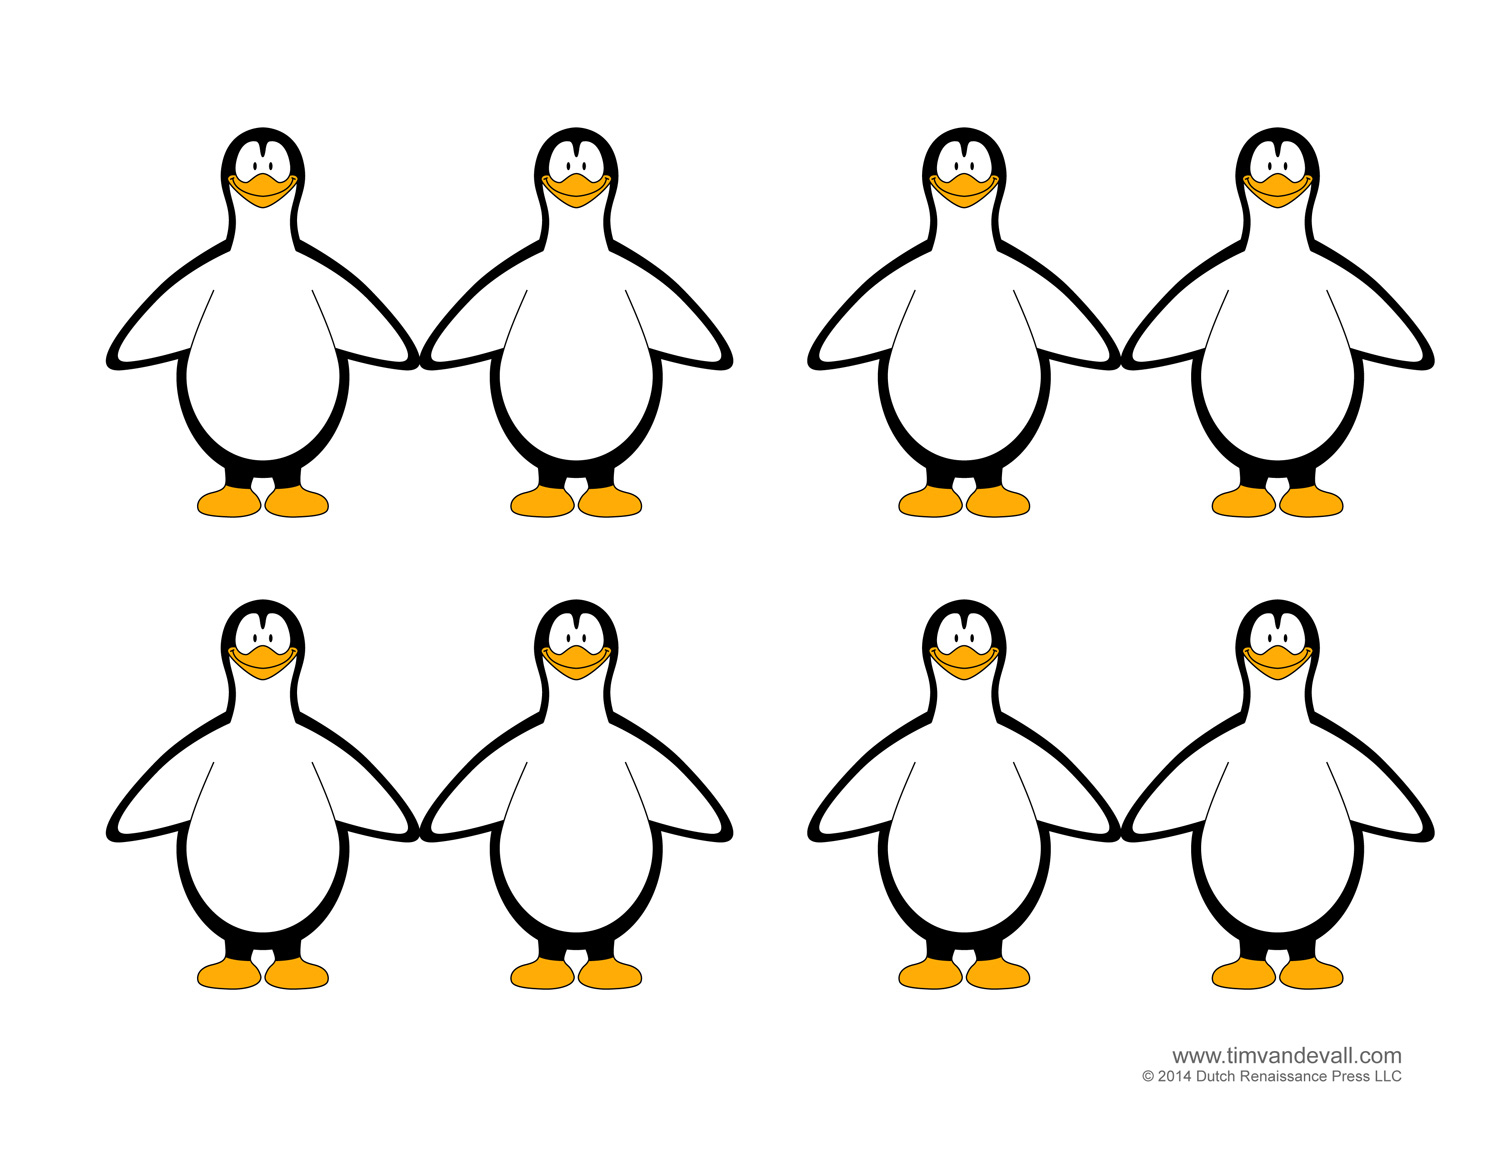 Penguin Template, Coloring Pages, Clipart Pictures And Crafts - Free Printable Penguin Template